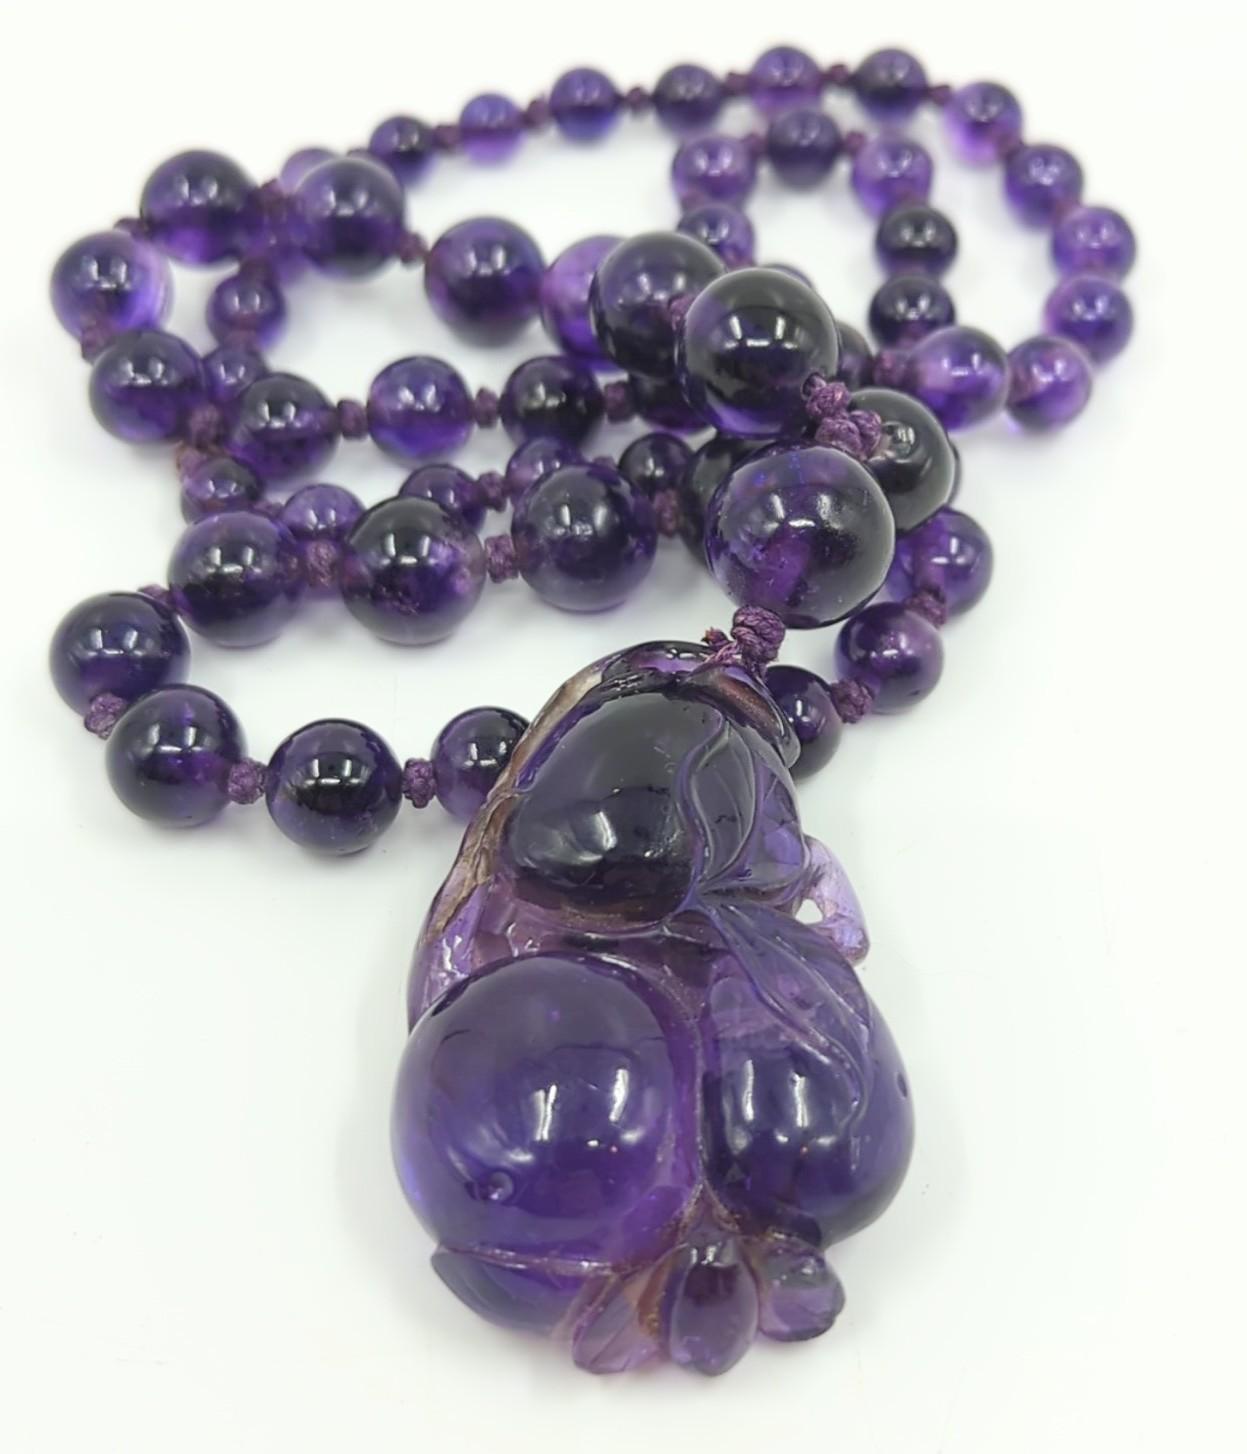 This late 19c to early 20c carved intense purple amethyst gemstone beaded necklace is comprised of a large, well carved amethyst double gourd pendant, and graduating amethyst beads from 7.0mm to 13.8mm in diameter. The necklace achieves a total